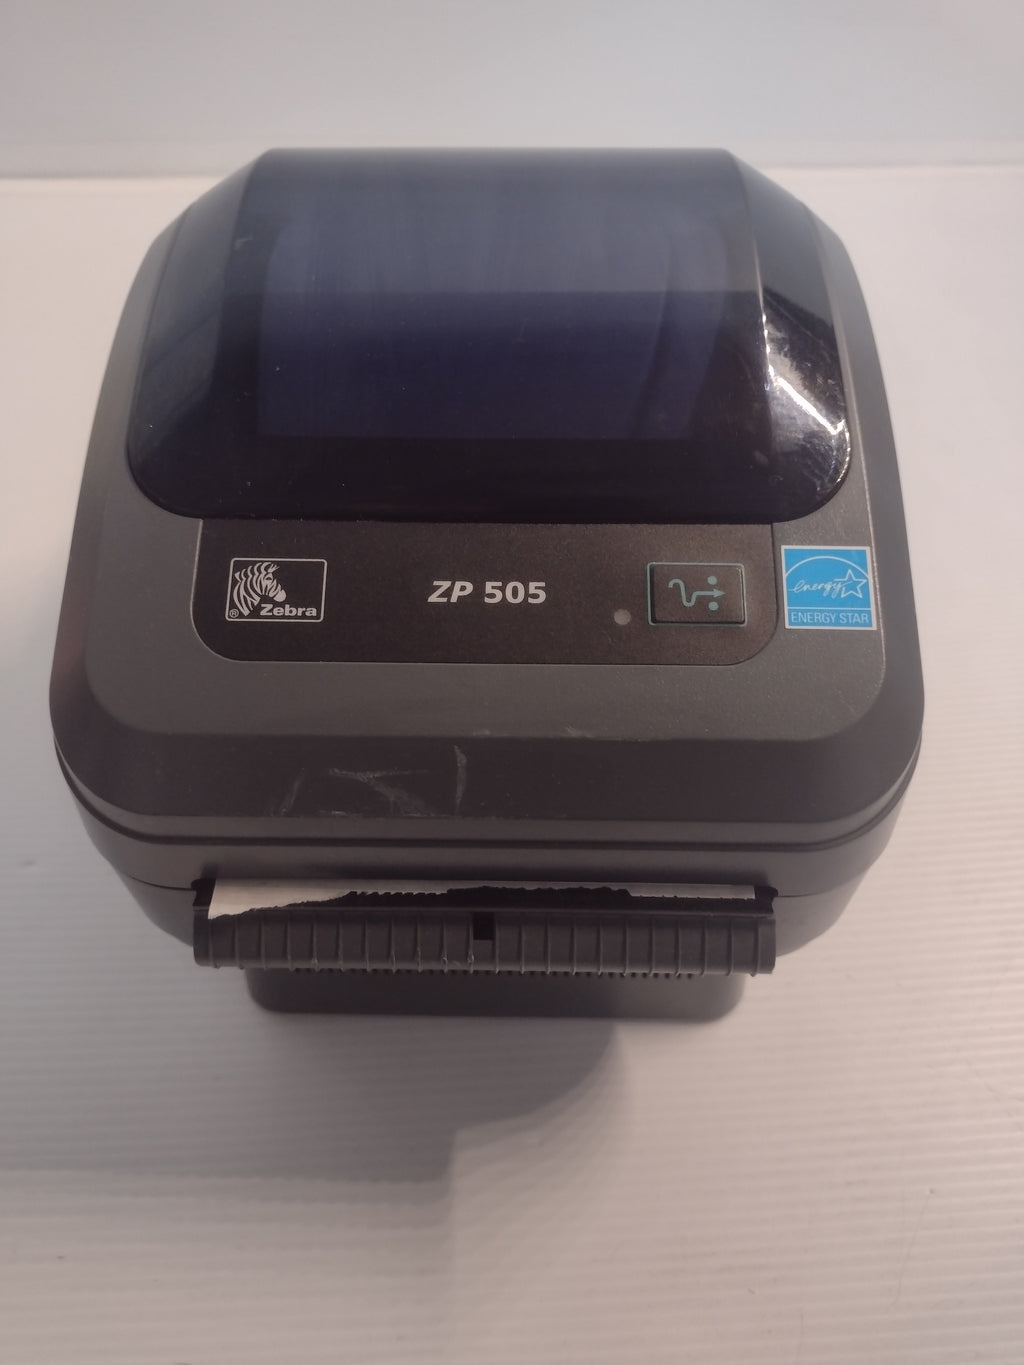 Zebra ZP 505 Thermal Label Printer w/Power Cord: Successfully Tested